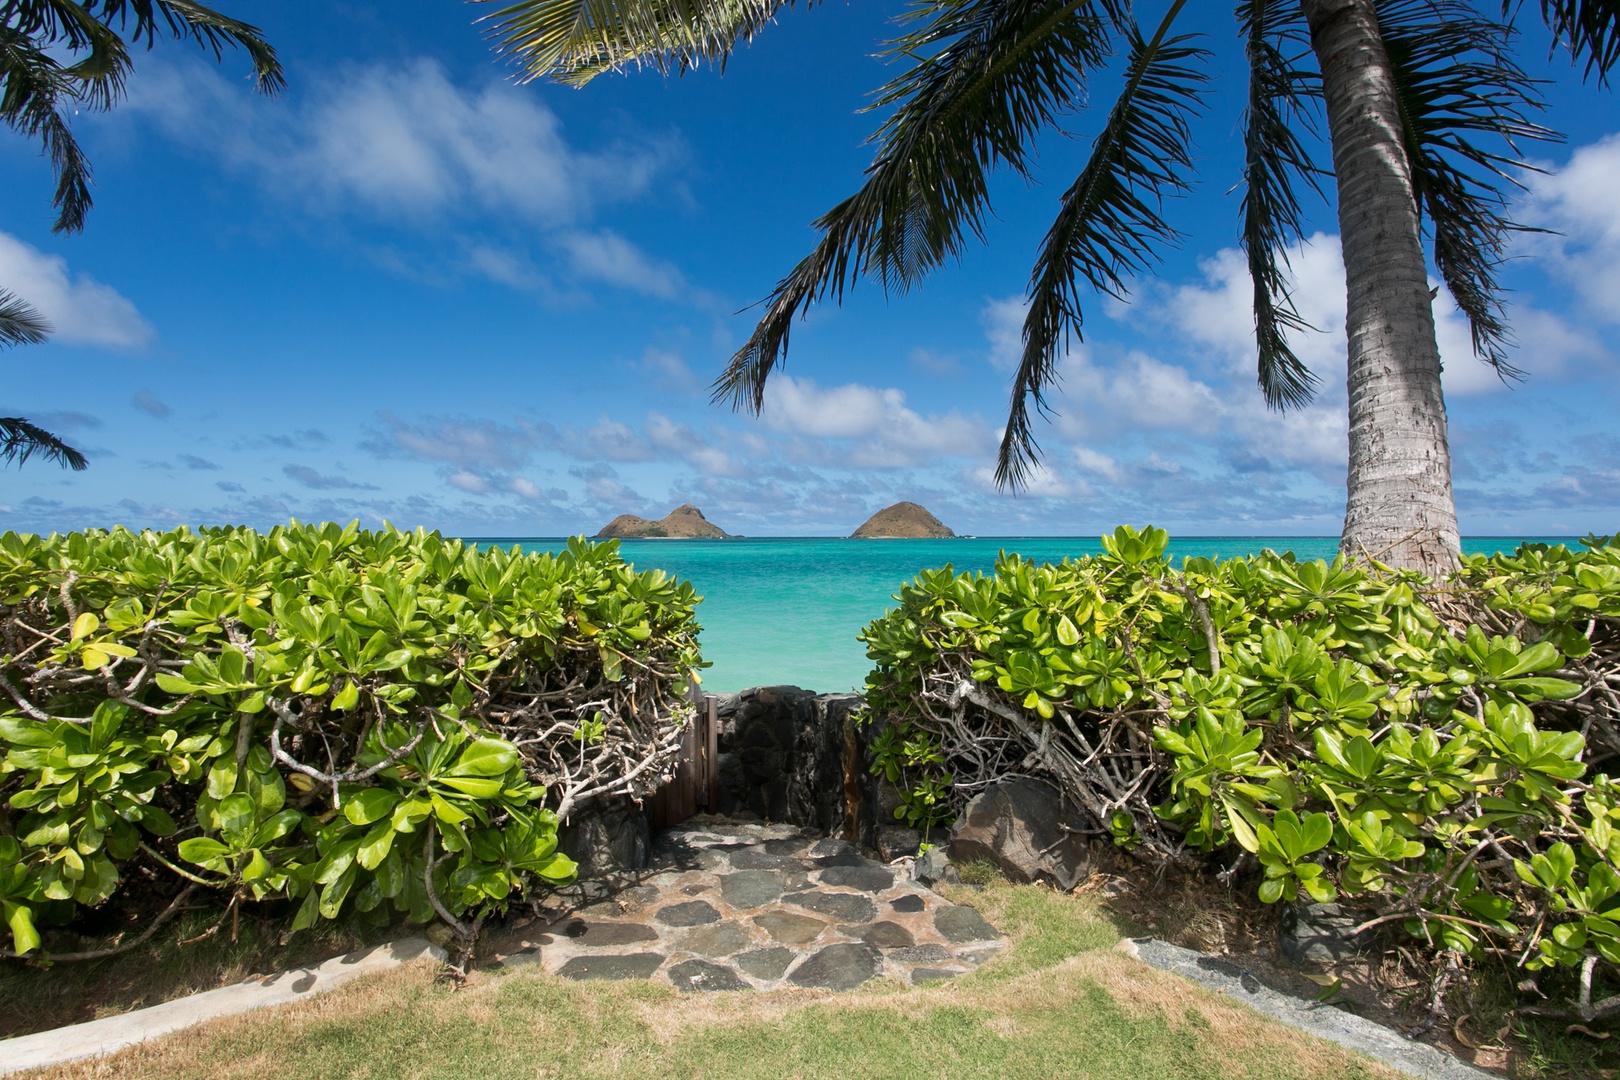 Kailua Vacation Rentals, Hale Melia* - The beach is just steps away from your home.